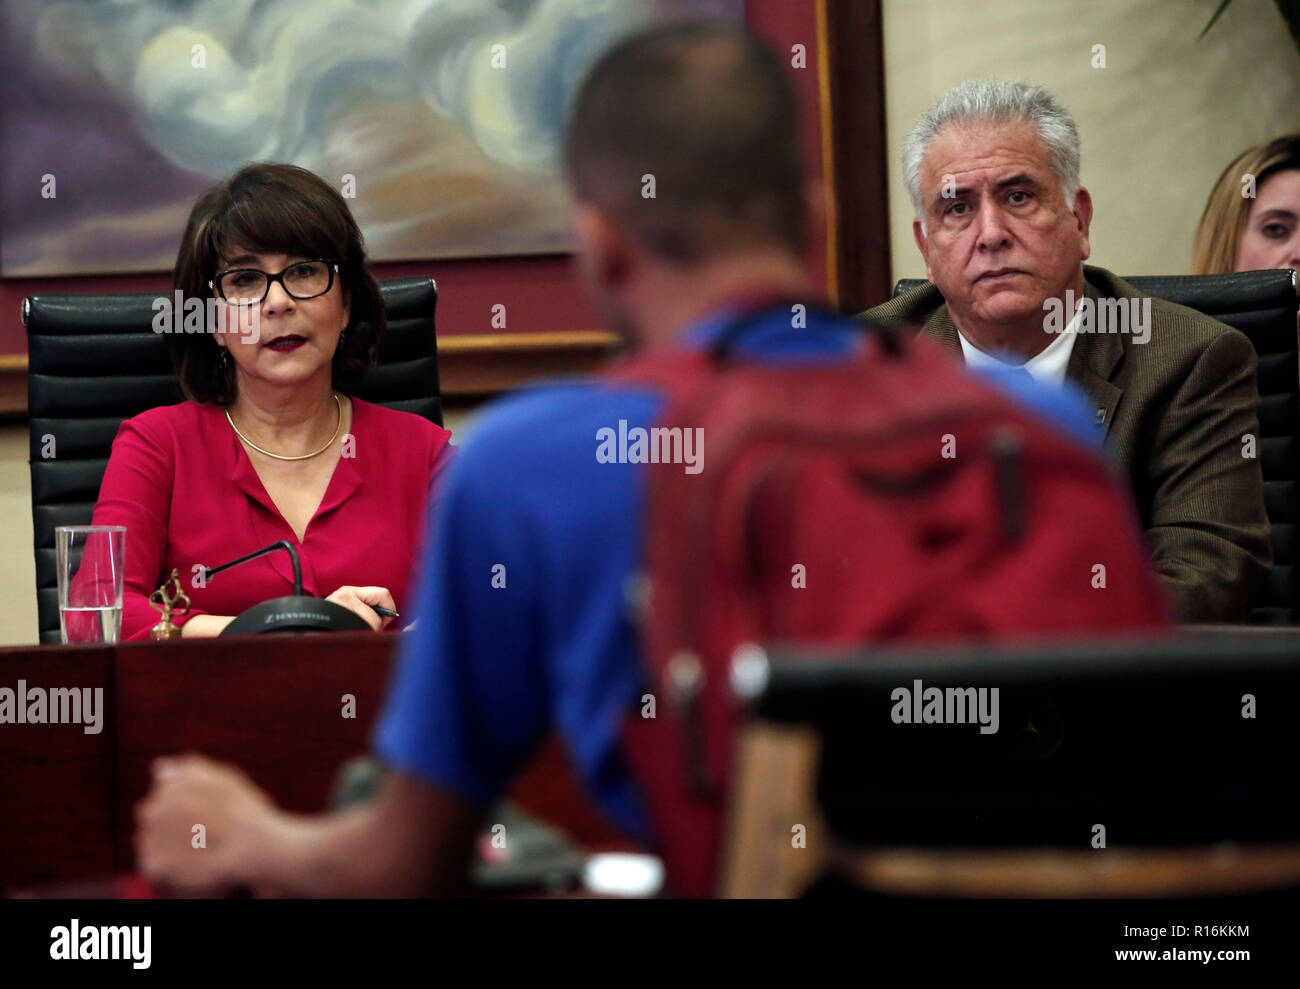 Valencia, Carabobo, Venezuela. 9th Nov, 2018. November 09, 2018. Jessy Divo (front-left), doyenne and Pablo Aure (front-rigth) autorithy of the University of Carabobo, listening a student took his right to speak during the extraordinary university council held at the dean, where various topics were discussed, including the arrest of the Bachelor Ivan Uzcategui, president of the FCU, federation of university centers (for its acronym in Spanish) and Ramon Bravo, head of the university canteen. Those who were arrested and accused of selling food products destined for a house of higher educa Stock Photo